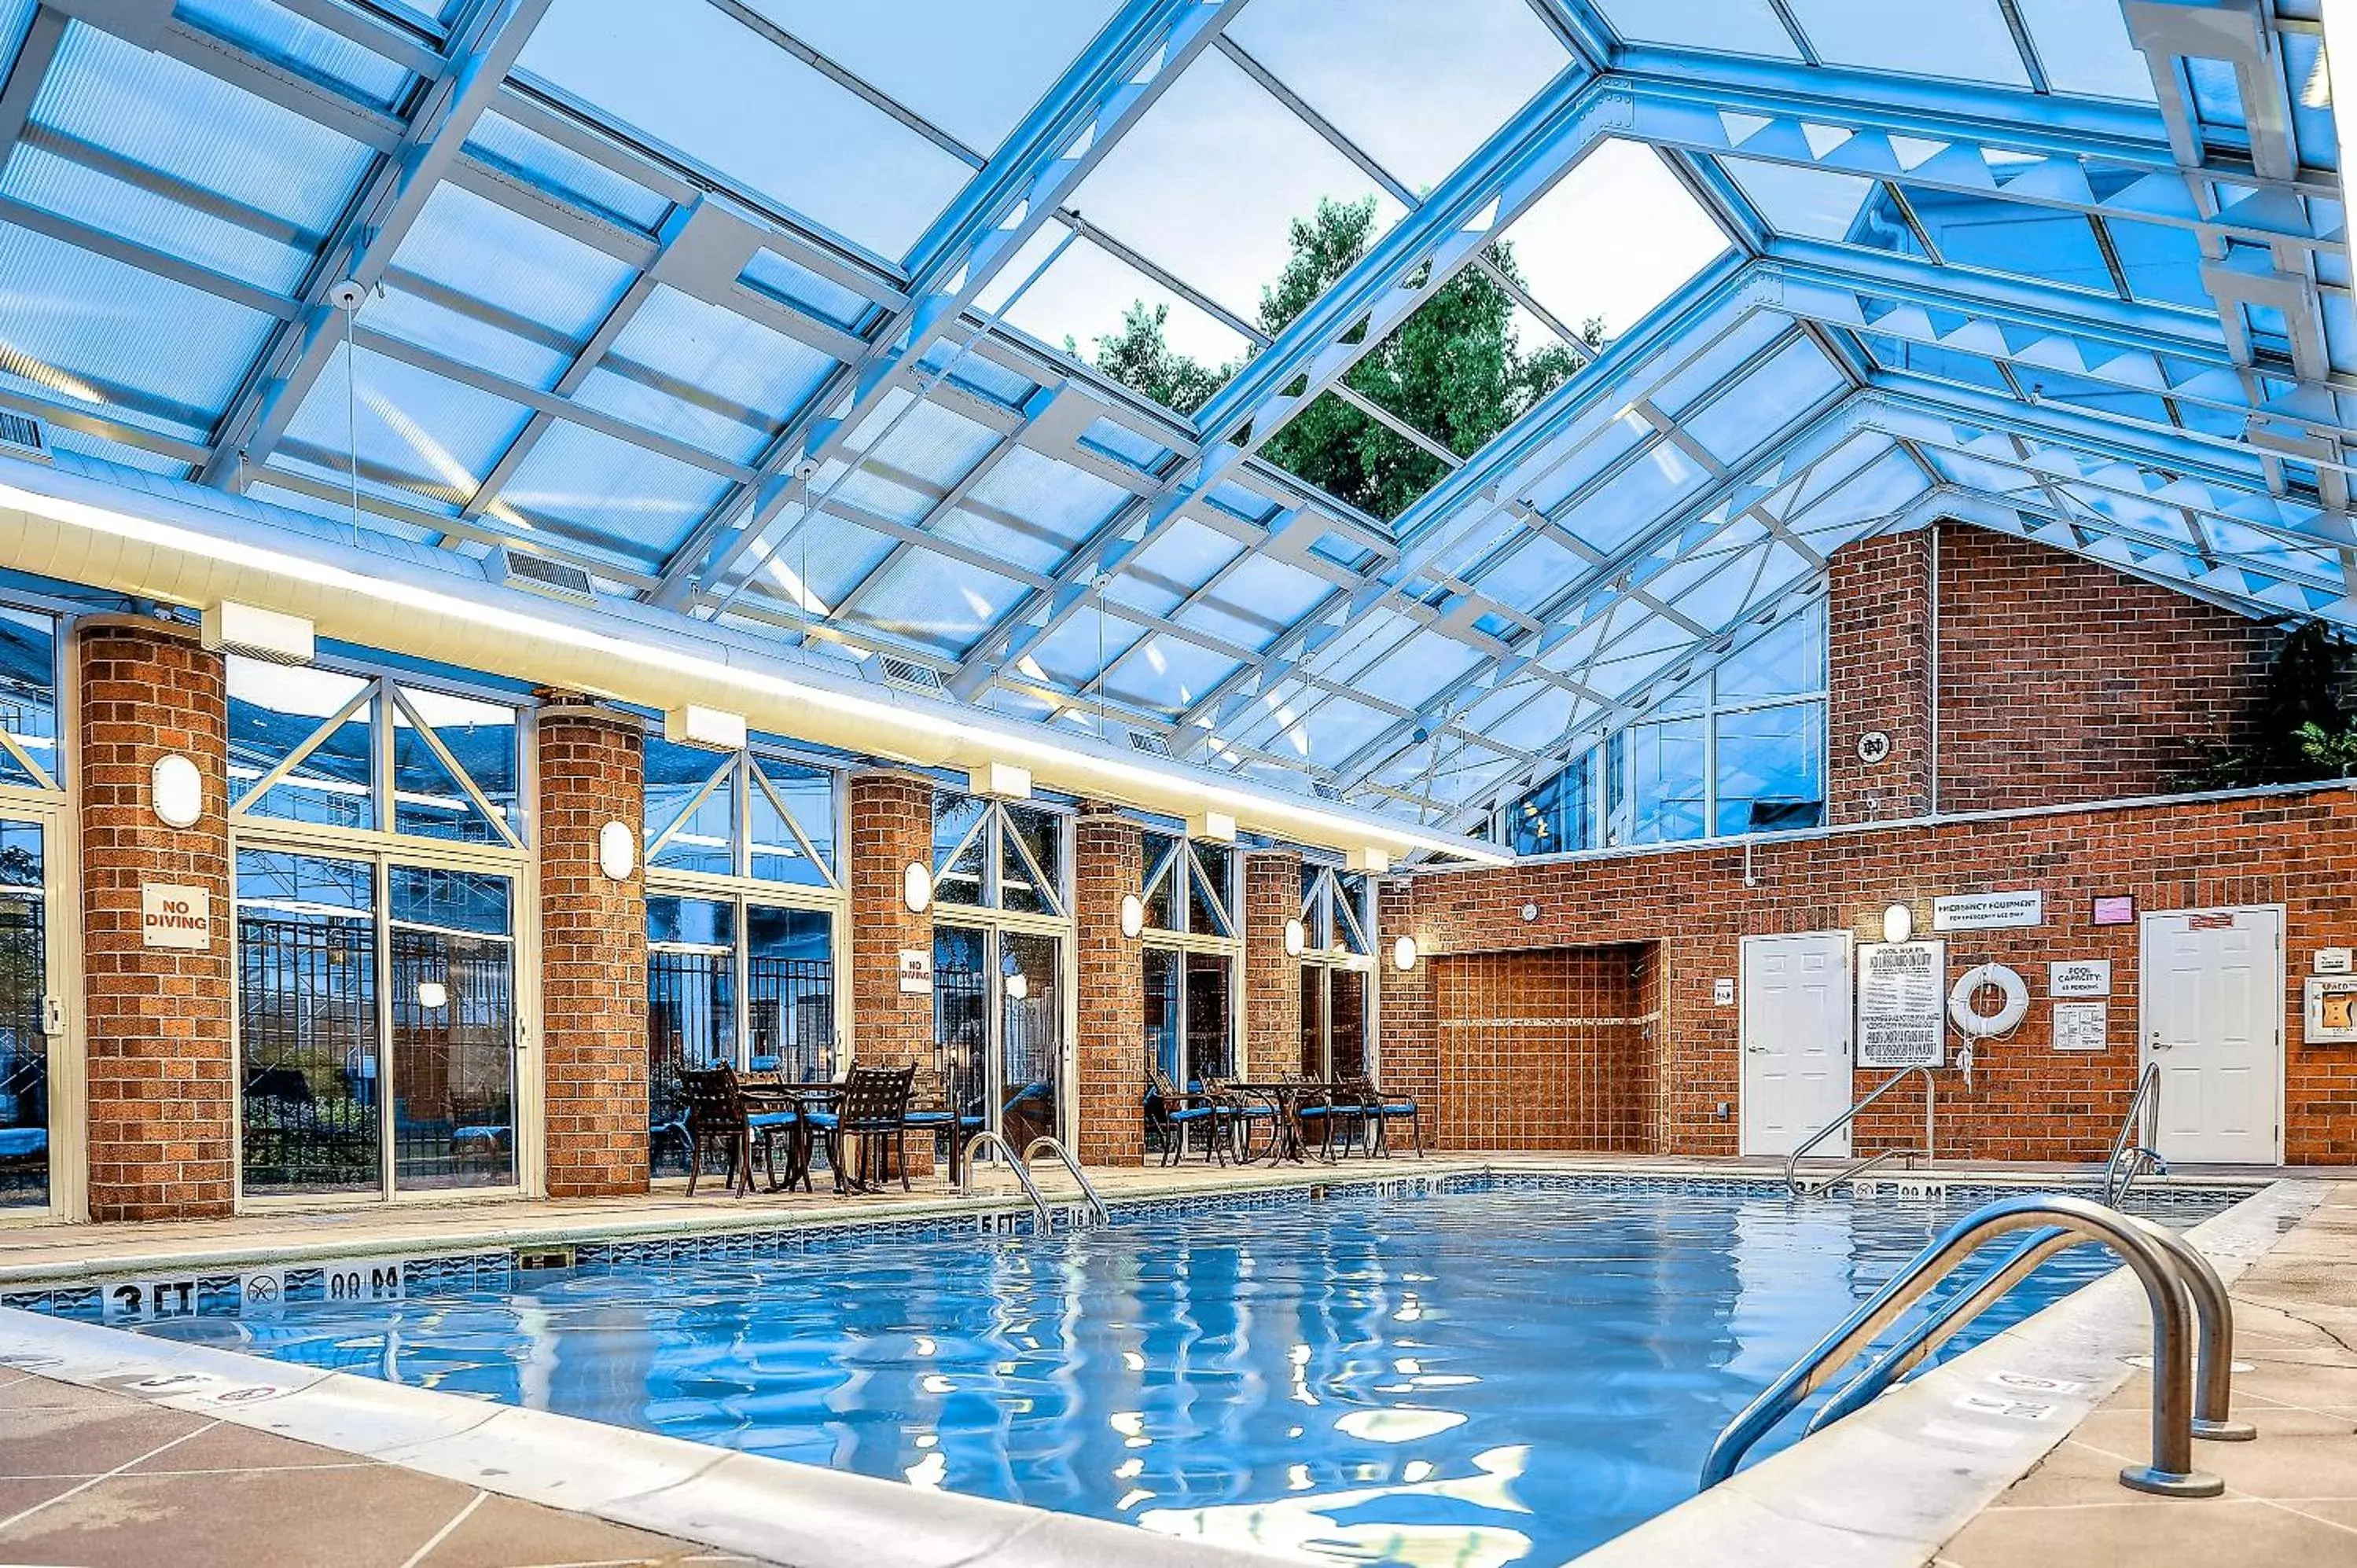 Swimming pool in Varsity Clubs of America South Bend